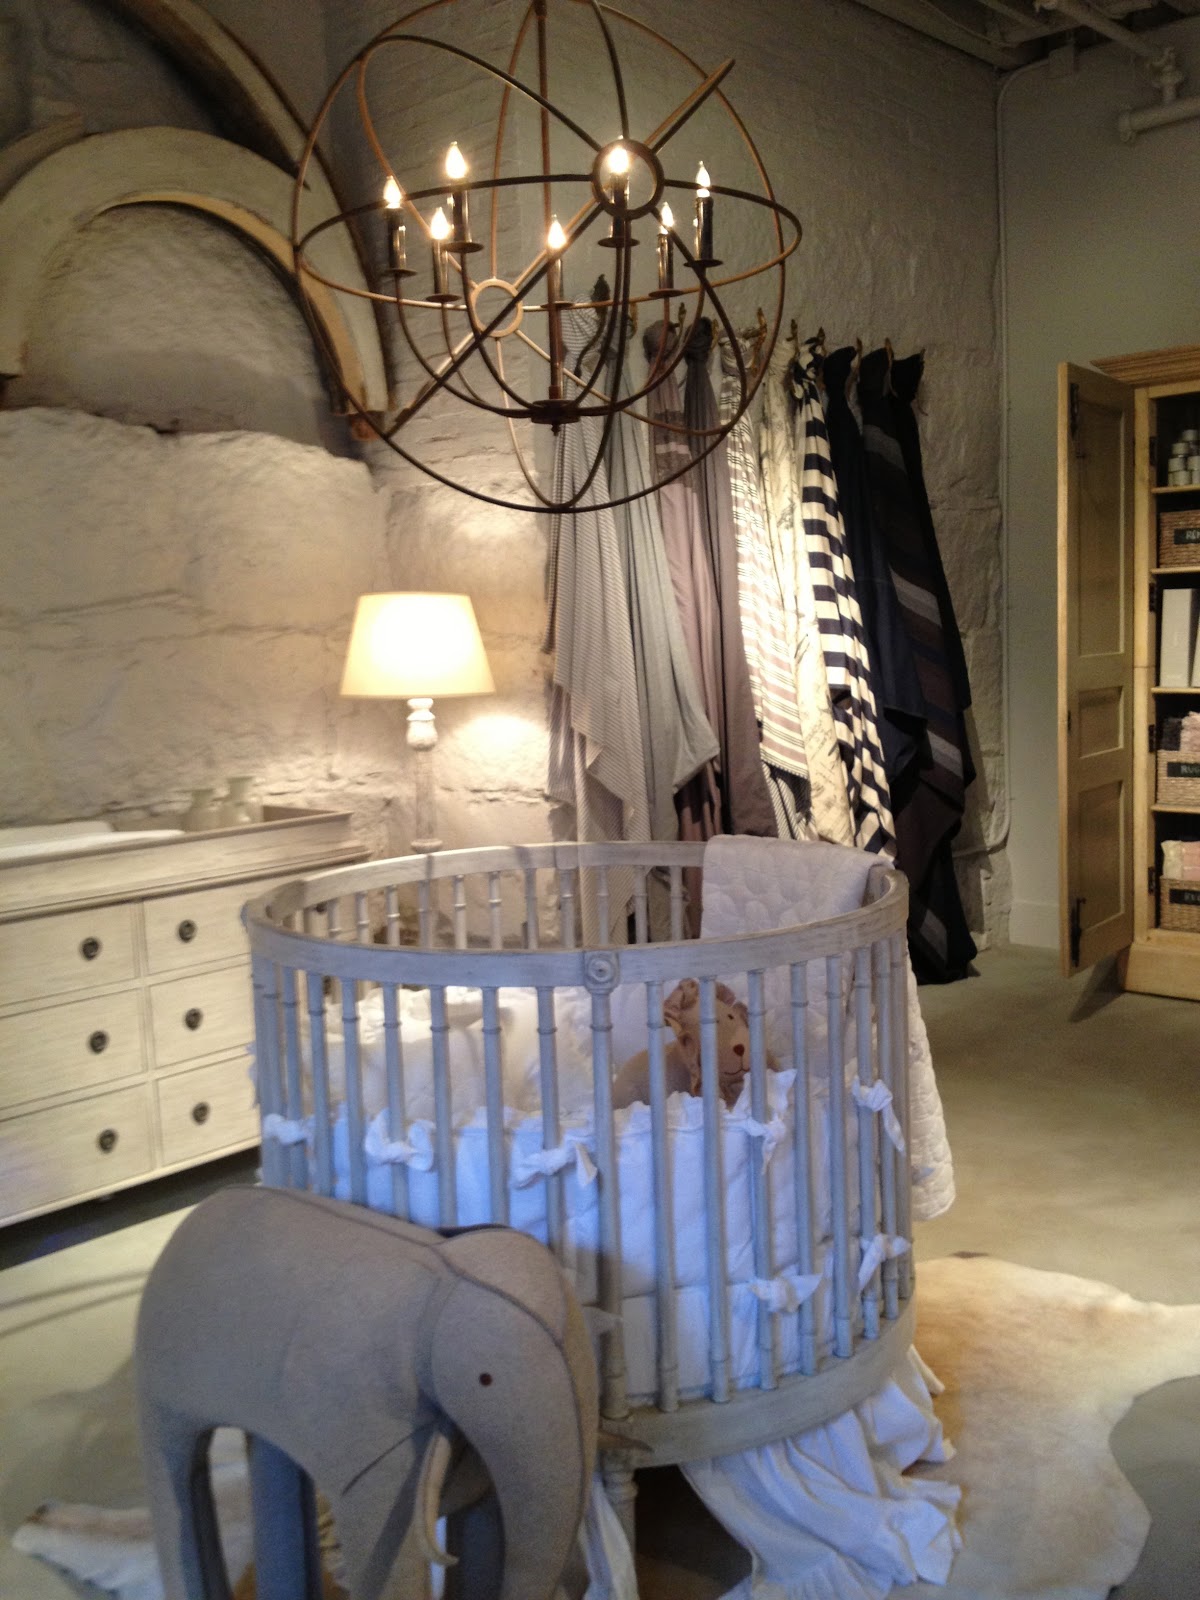 Home Baby With Warm Home Baby Room Designed With Unique Textured Grey Wall Hit By White Skirted Round Crib With Chandelier Kids Room Adorable Round Crib Decorated By Vintage Ornaments In Small Room